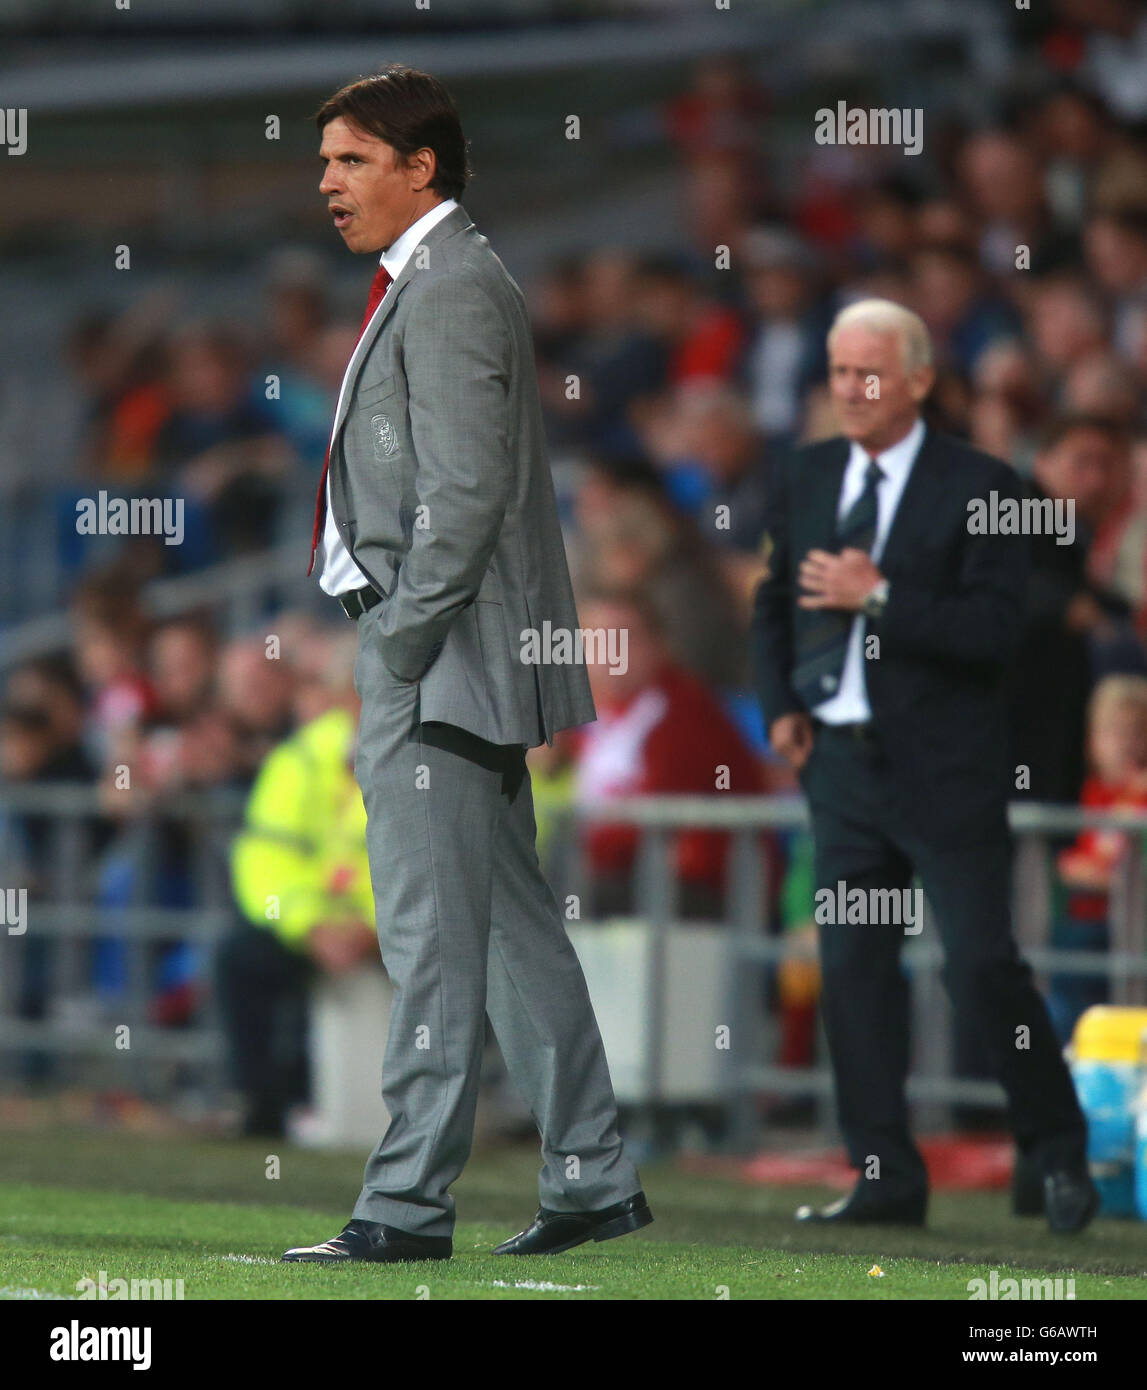 Soccer - Vauxhall International Friendly - Wales v Republic of Ireland - Cardiff City Stadium. Wales manager Chris Coleman during the International Friendly at Cardiff City Stadium, Cardiff. Stock Photo